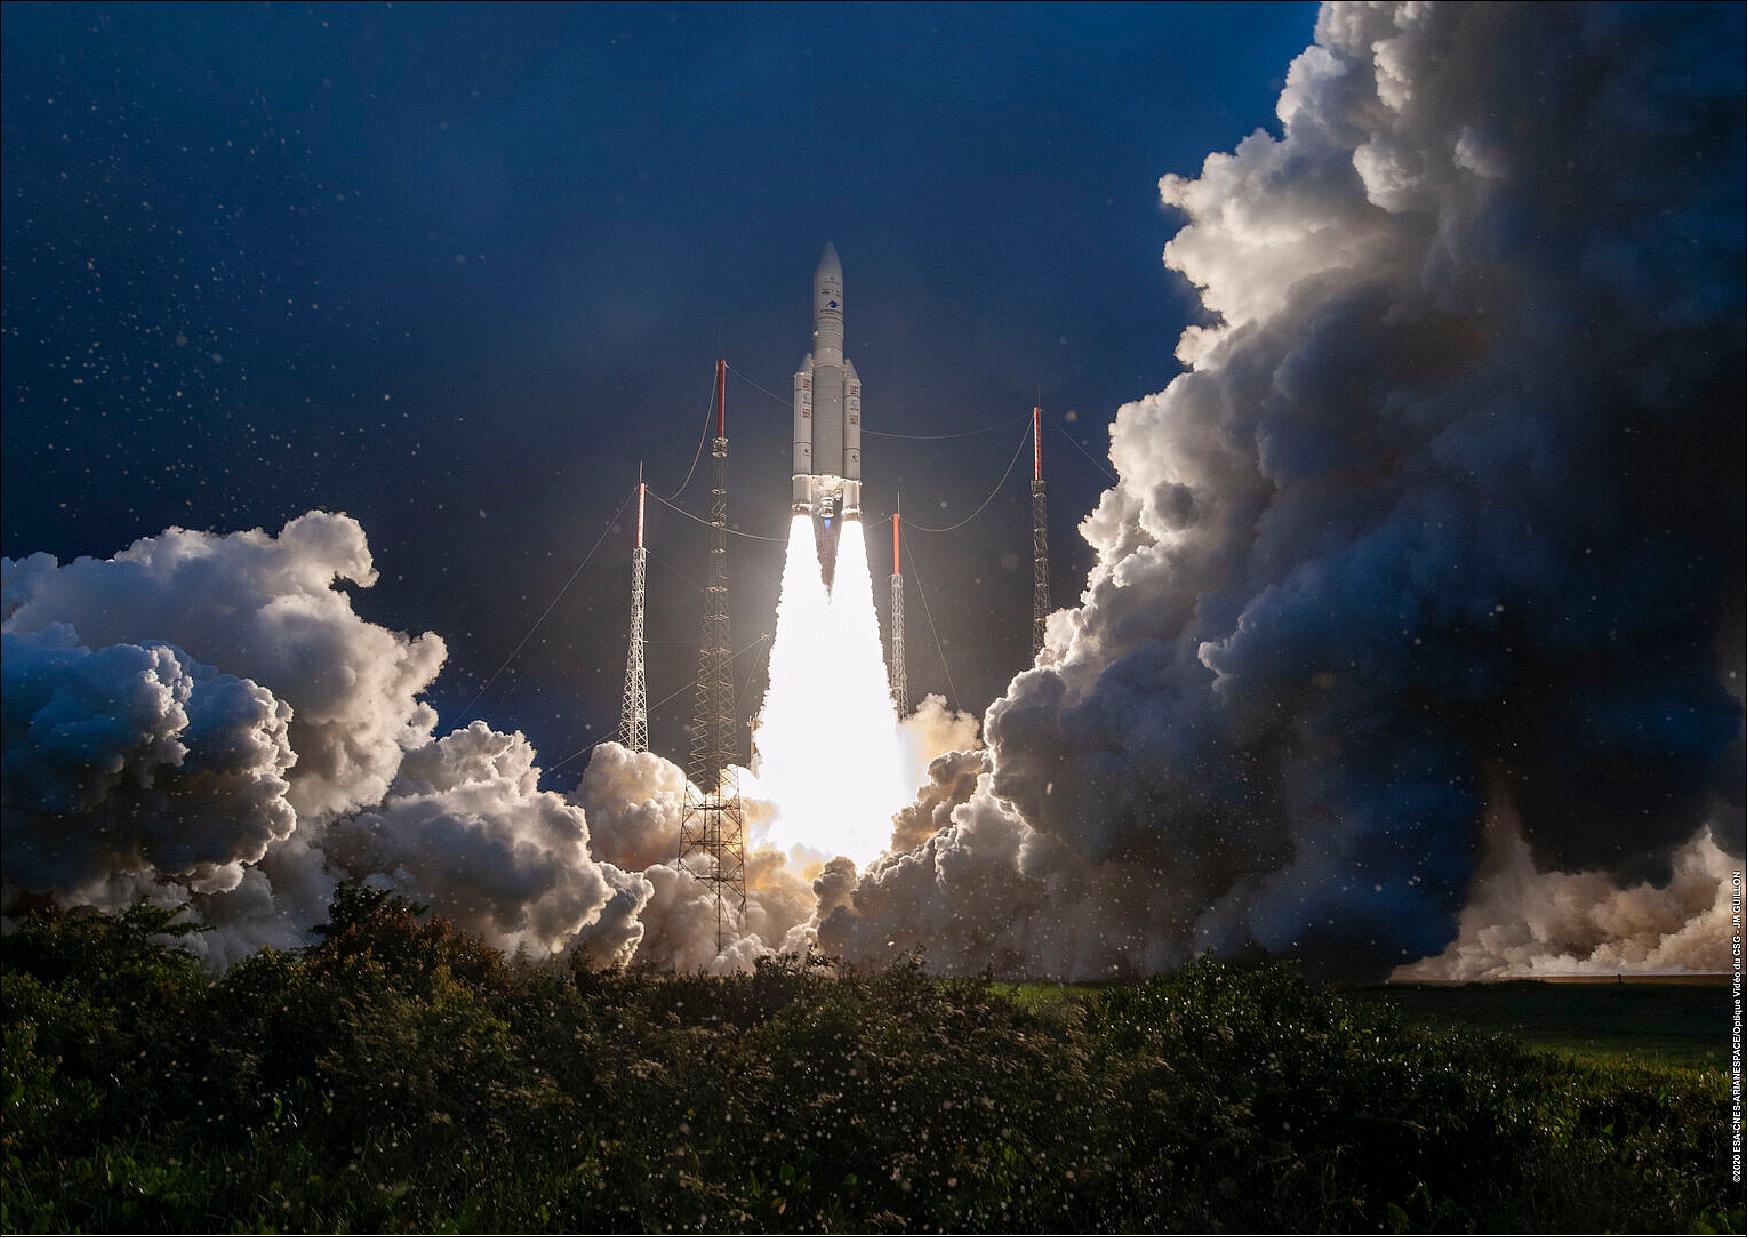 Figure 5: Ariane 5 flight VA251 lifted off from Europe's Spaceport in French Guiana and delivered two telecom satellites, Konnect and GSAT-30, into their planned orbits (image credit: ESA/CNES/Arianespace - Optique Vidéo du CSG)